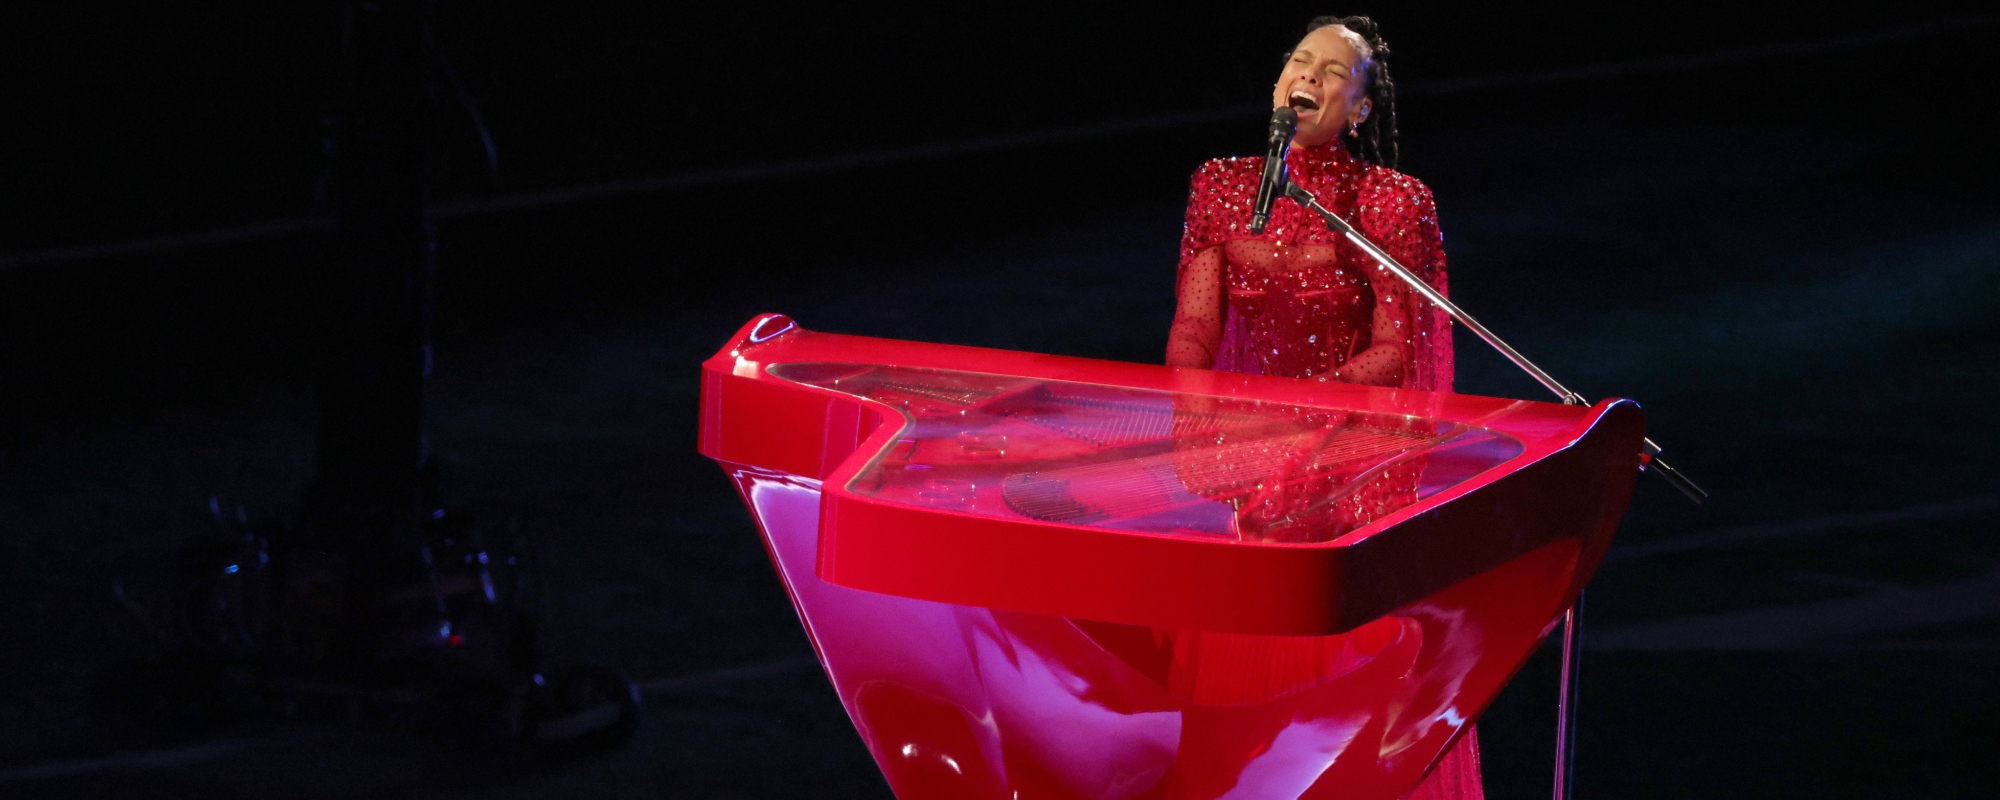 Alicia Keys performing at the Super Bowl Halftime Show